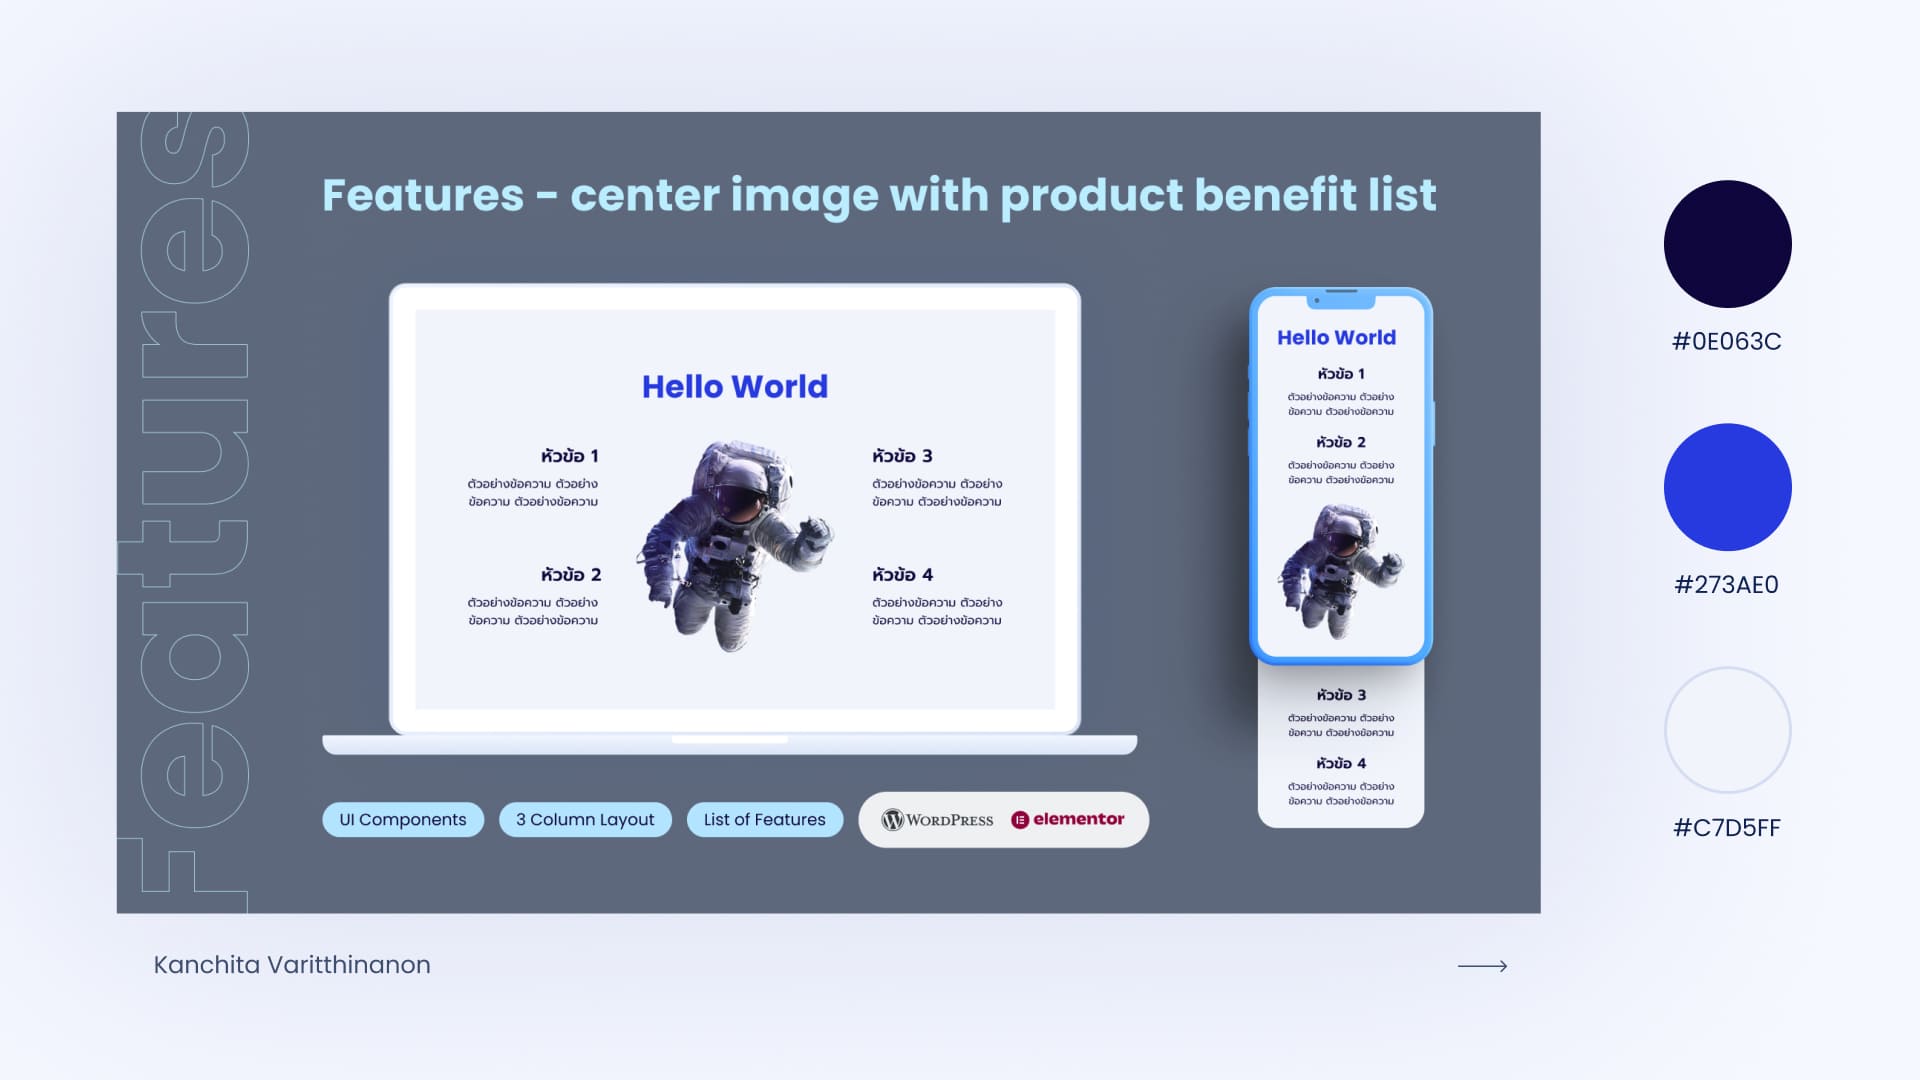 ui-features-center-image-with-product-benefit-list-01-featured-yuikanchita